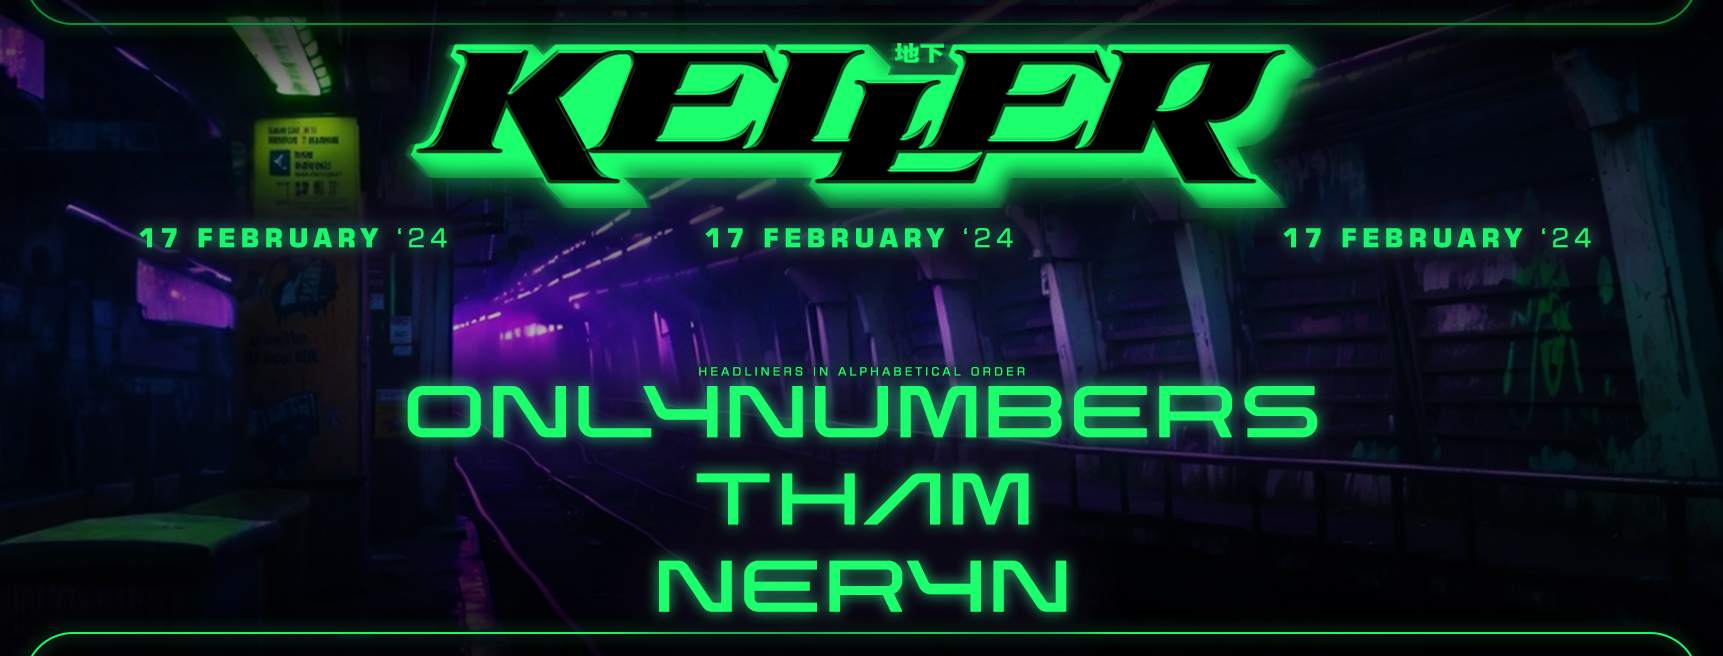 KELLER HARD CLUB 006: ONLYNUMBERS & Tham - フライヤー表